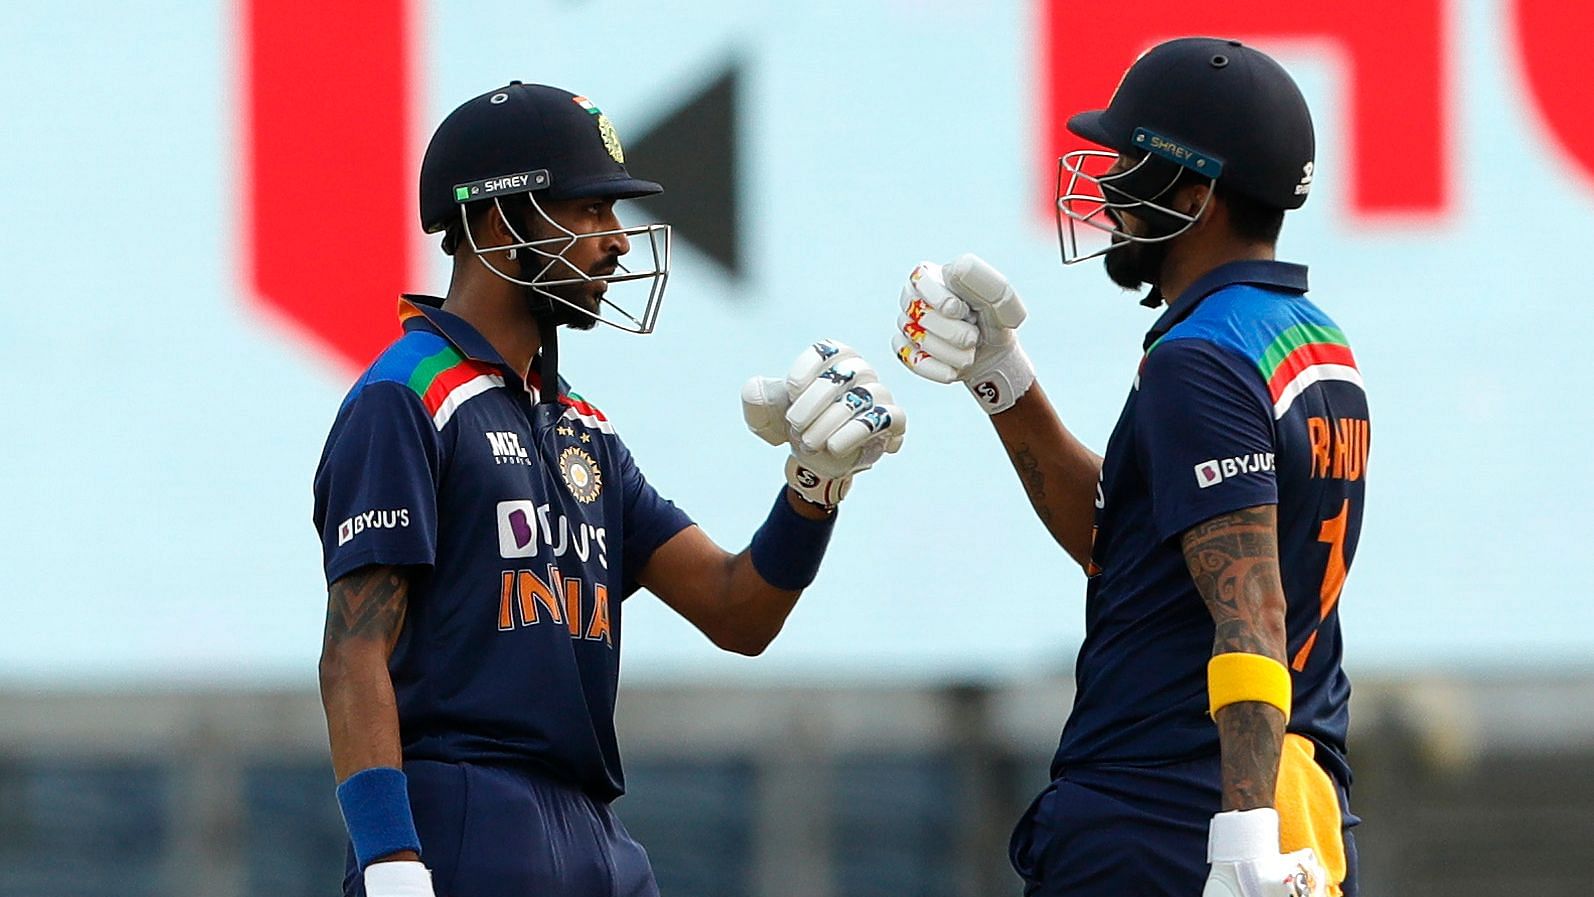 India posted 317/5 after being put into bat first by England in the ODI series-opener in Pune.